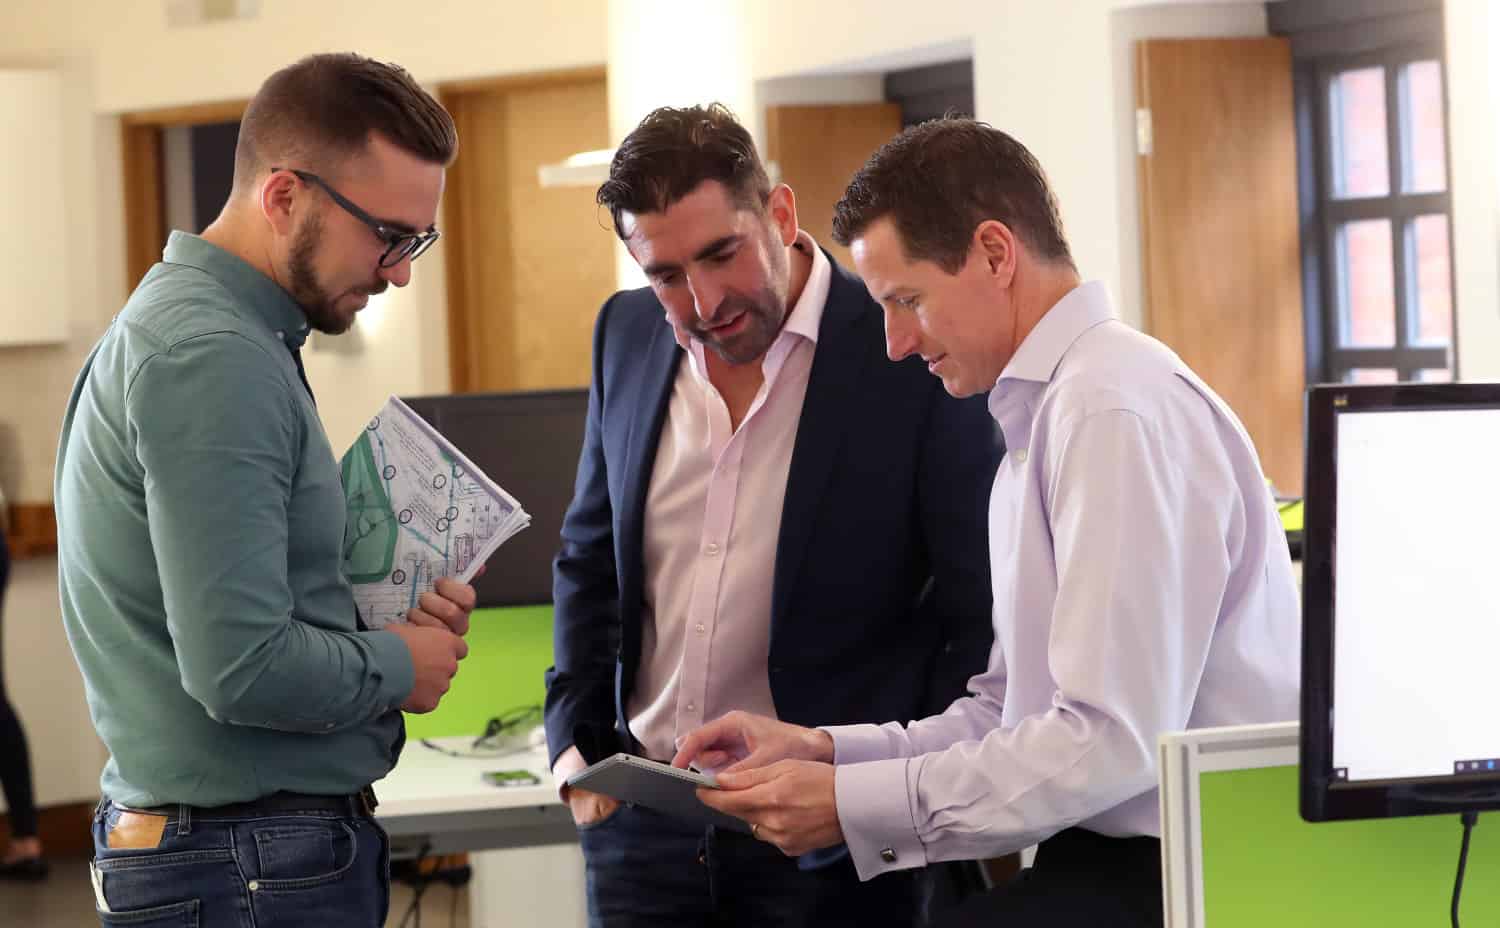 Three men in an office looking at an Ipad discussing designs